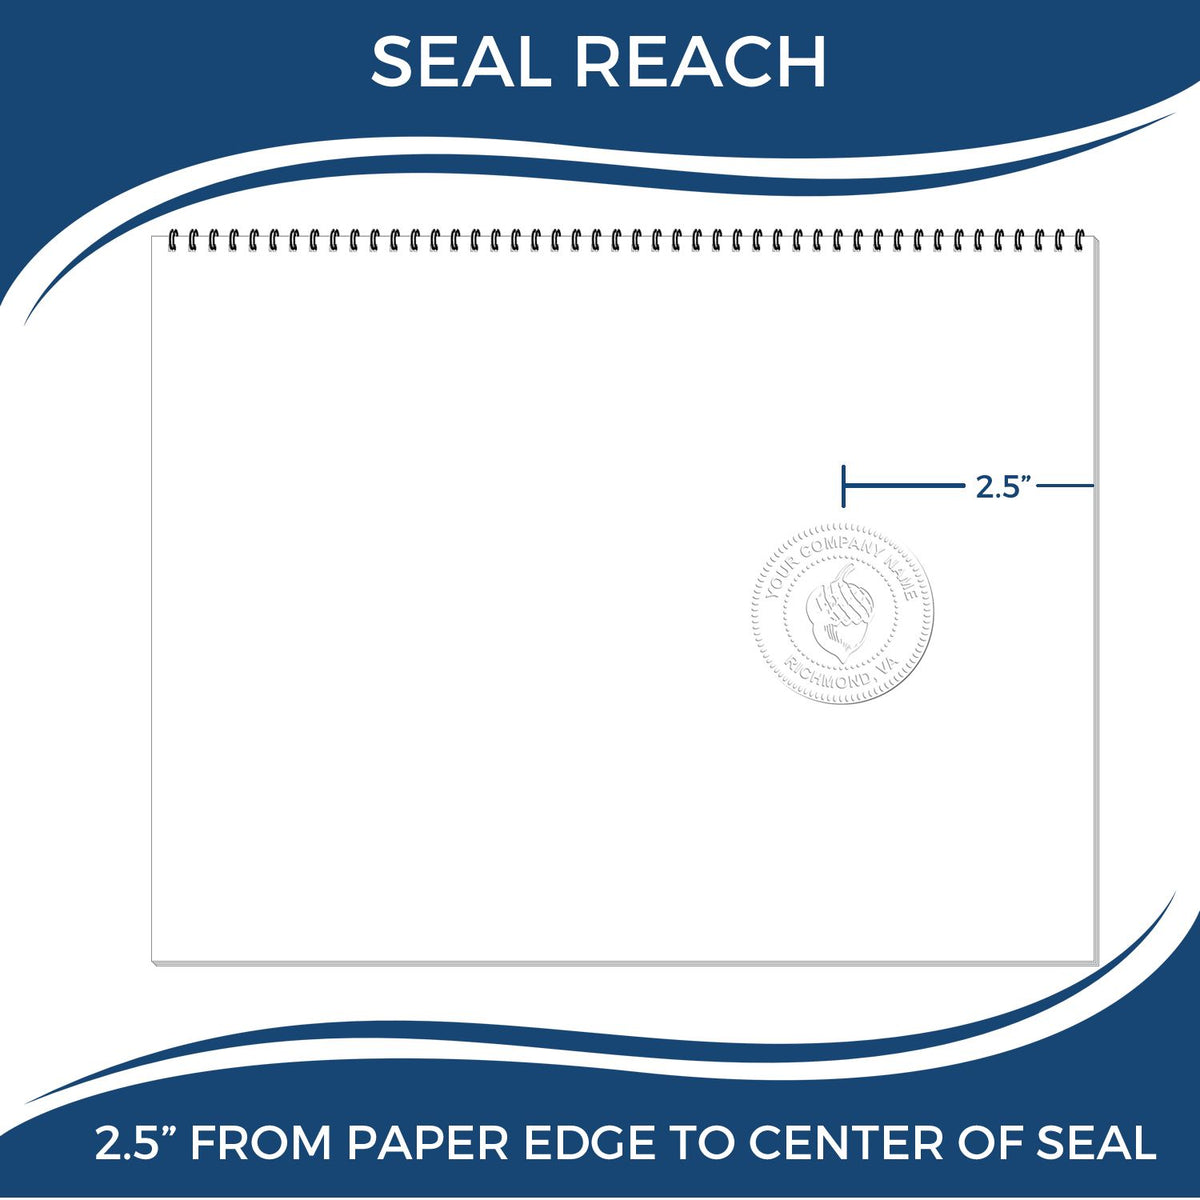 An infographic showing the seal reach which is represented by a ruler and a miniature seal image of the Long Reach Louisiana Land Surveyor Seal